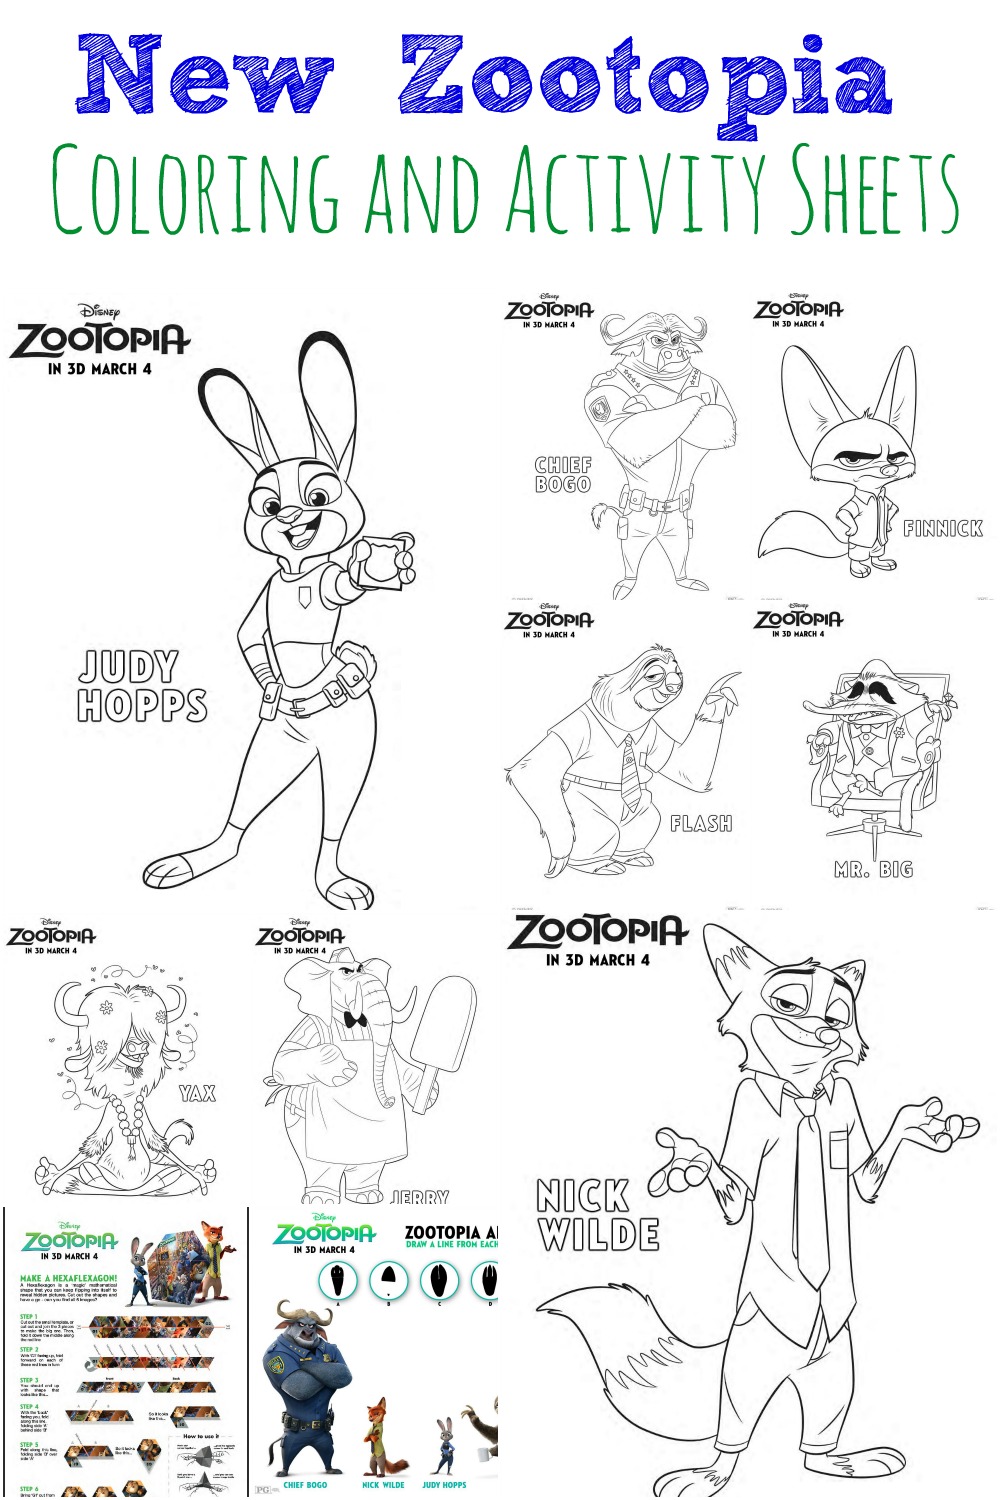 Zootopia Coloring and Activity Sheets